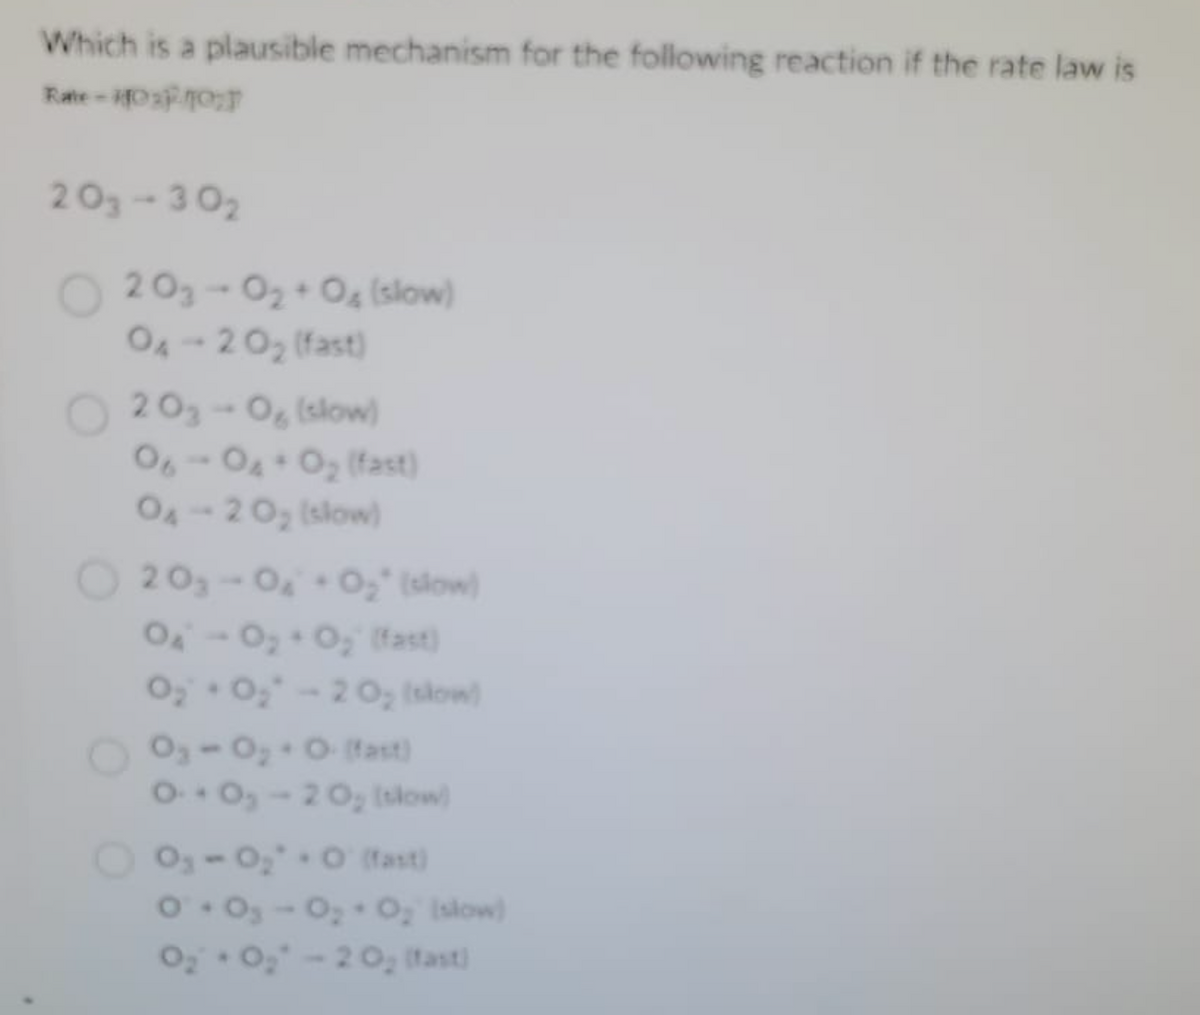 Which is a plausible mechanism for the following reaction if the rate law is
Rate -10% 10%
203-302
203-0₂ +0% (slow)
04-20₂ (fast)
203-0 (slow)
06-04+0₂ (fast)
04 - 20₂ (slow)
20₂-0₂ 0₂" (slow)
O₁ O₂ + O₂ (fast)
0₂ +0₂-20₂ (slow)
O₂-0₂ + O (fast)
0-0₂-20₂ (slow)
0₁-0₂ +0 (fast)
0+0₂-0₂ O₂ (slow)
O₂ + O₂-20₂ (fast)